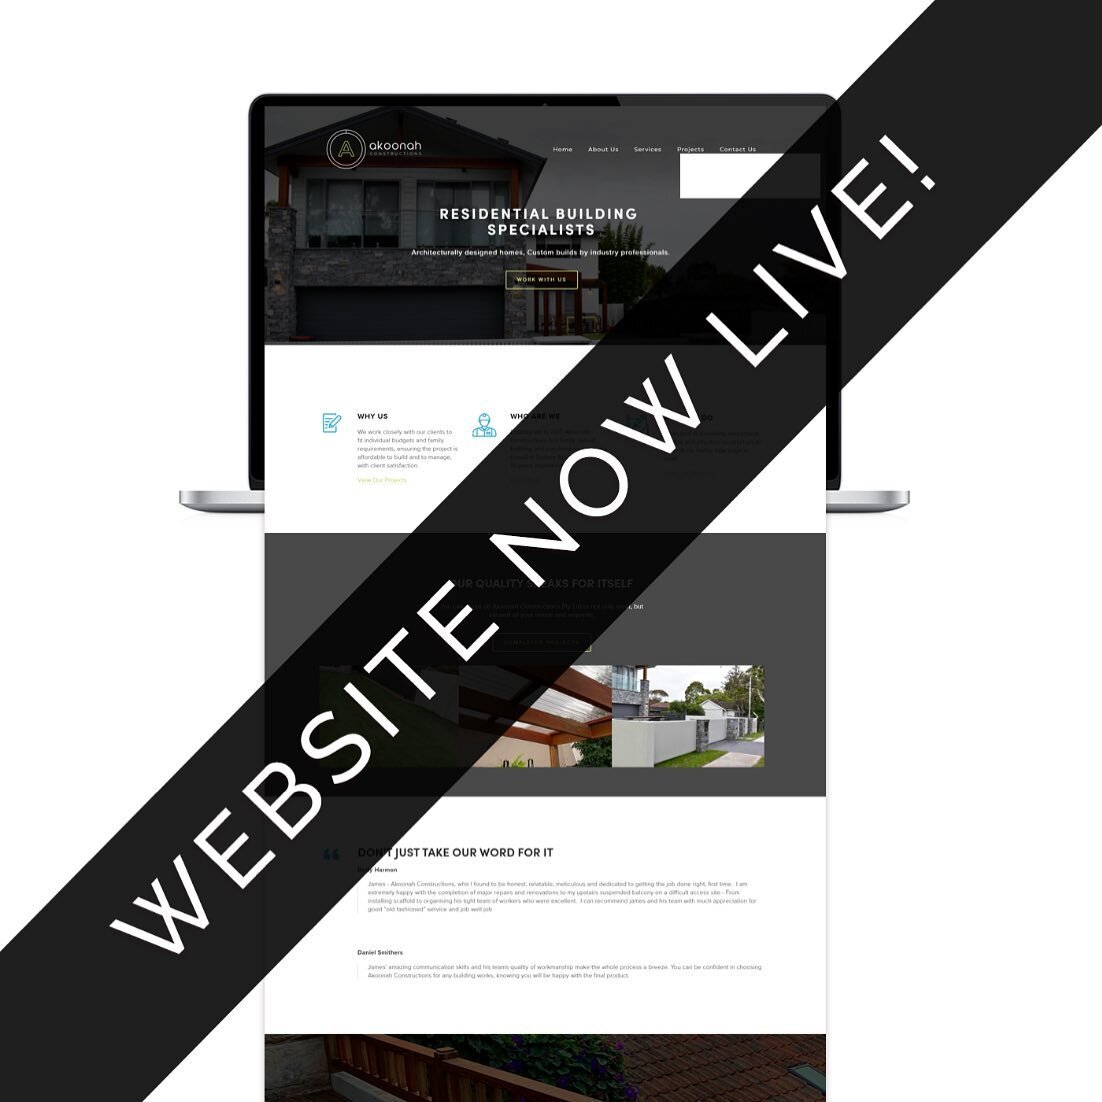 NEW WEBSITE! WE ARE LIVE!!
.
.
.
Check out our unreal new website!
Head over to our page and clink the link in our bio!! 
.
.
.
www.akoonahconstructions.com
.
.
.
@akoonahconstructions 
@inseek_trades 
@inseek_identity 

#shirebuilder #builder #local